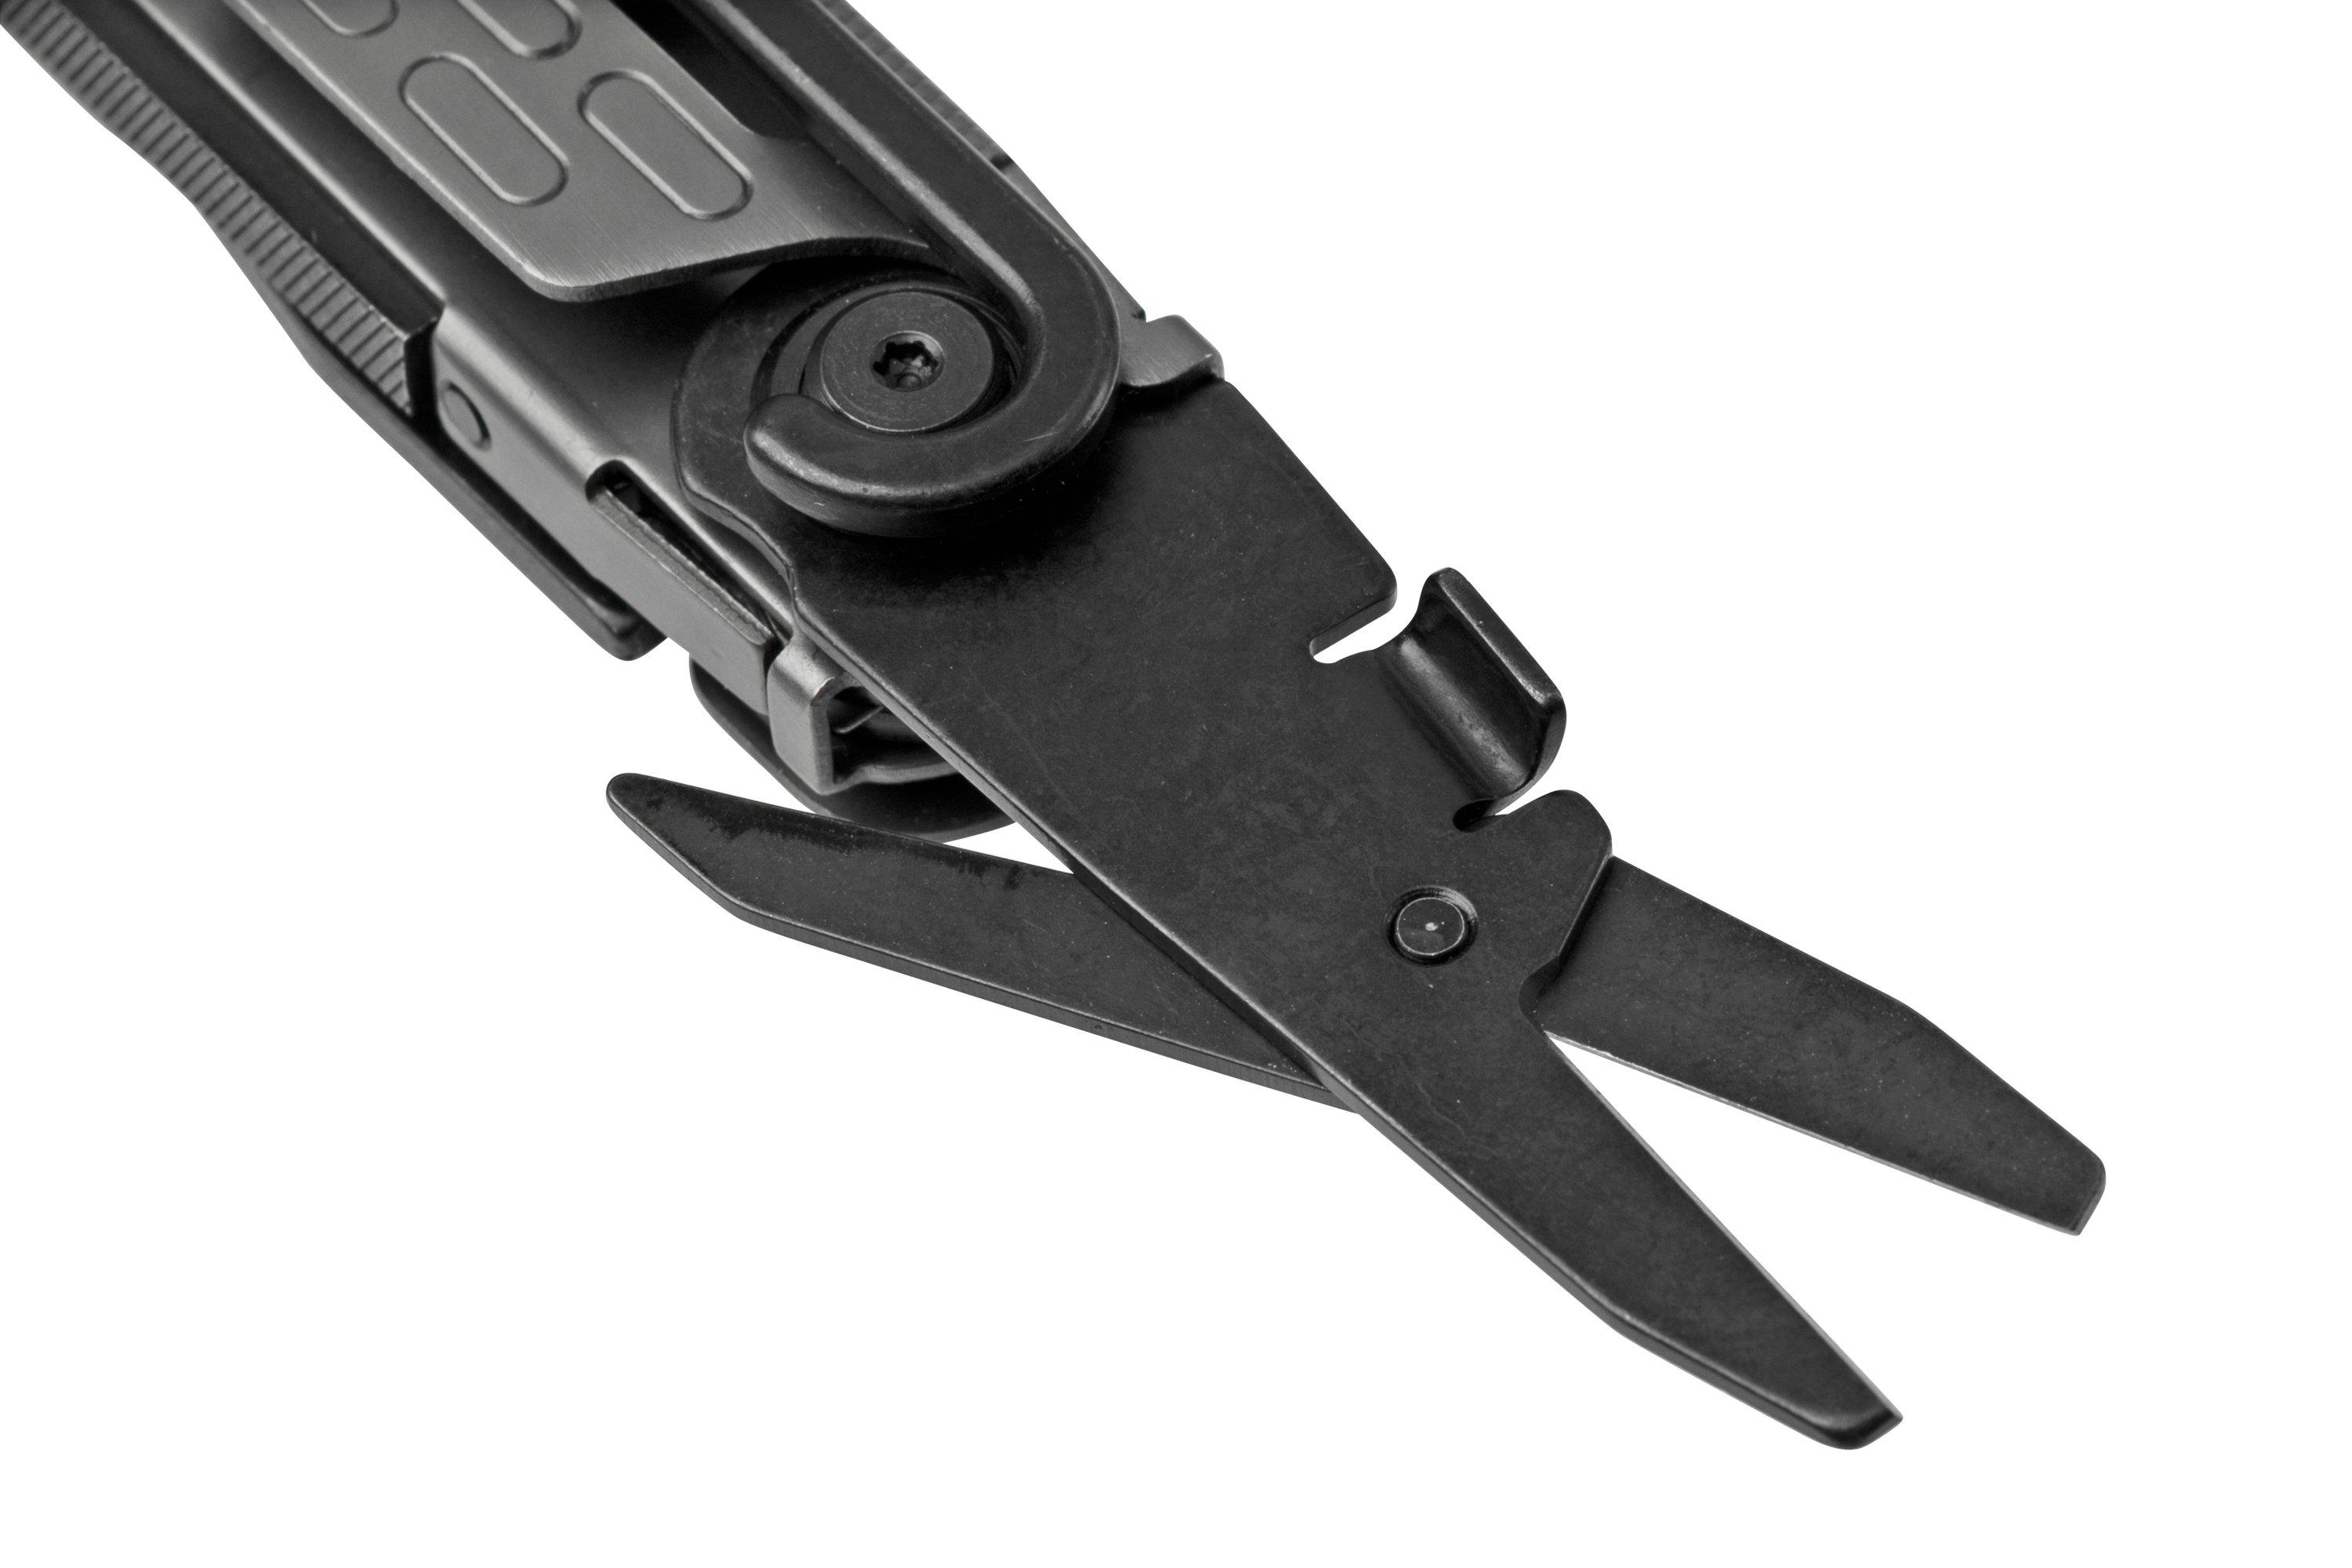 Gerber - Multitool Stake Out™ - 11 tools - Graphite - 30-001743 best price, check availability, buy online with